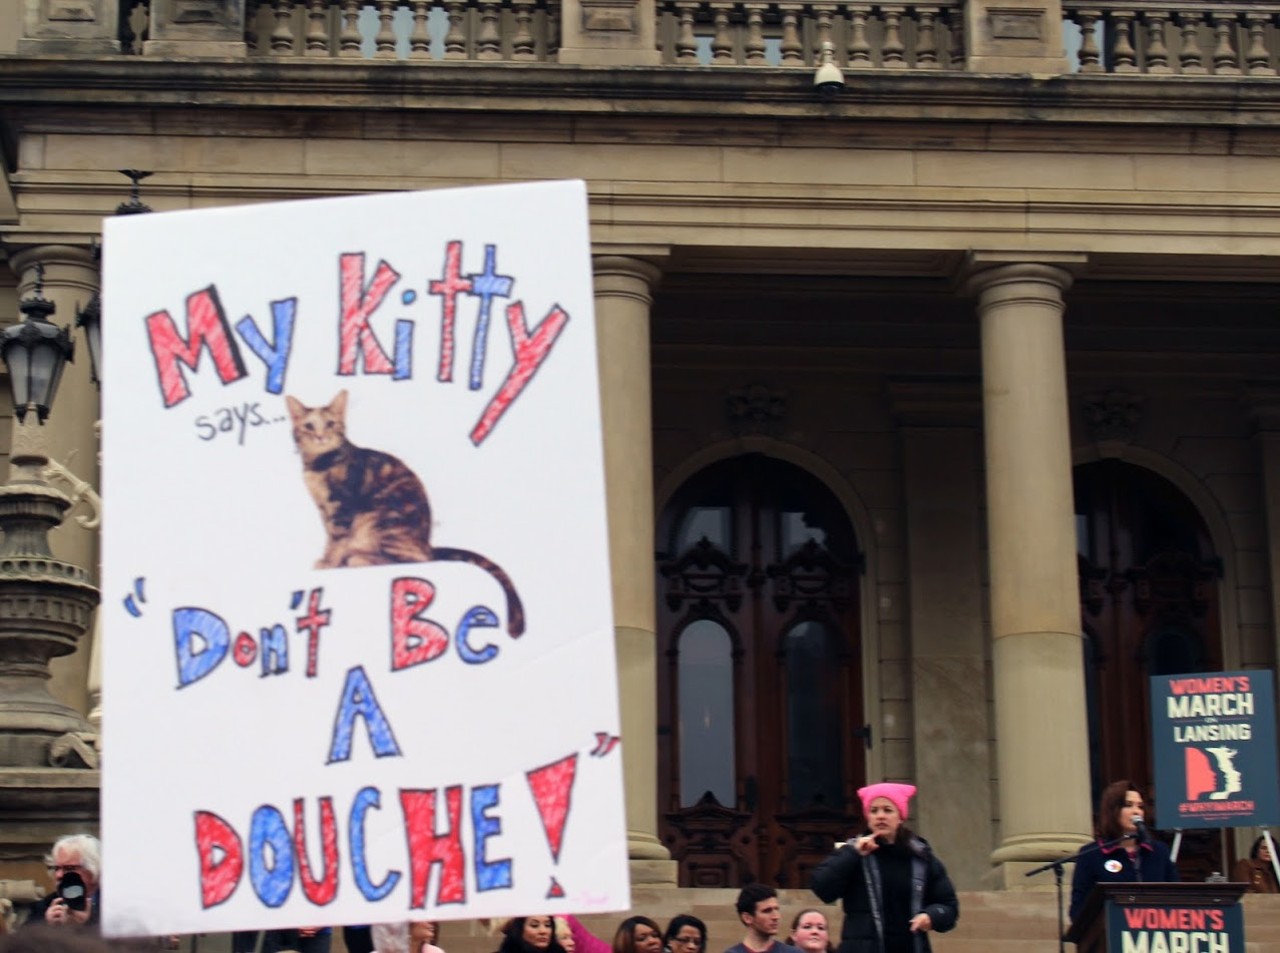 "My Kitty says Don't Be A Douche"
Photo by Chloe Michaels